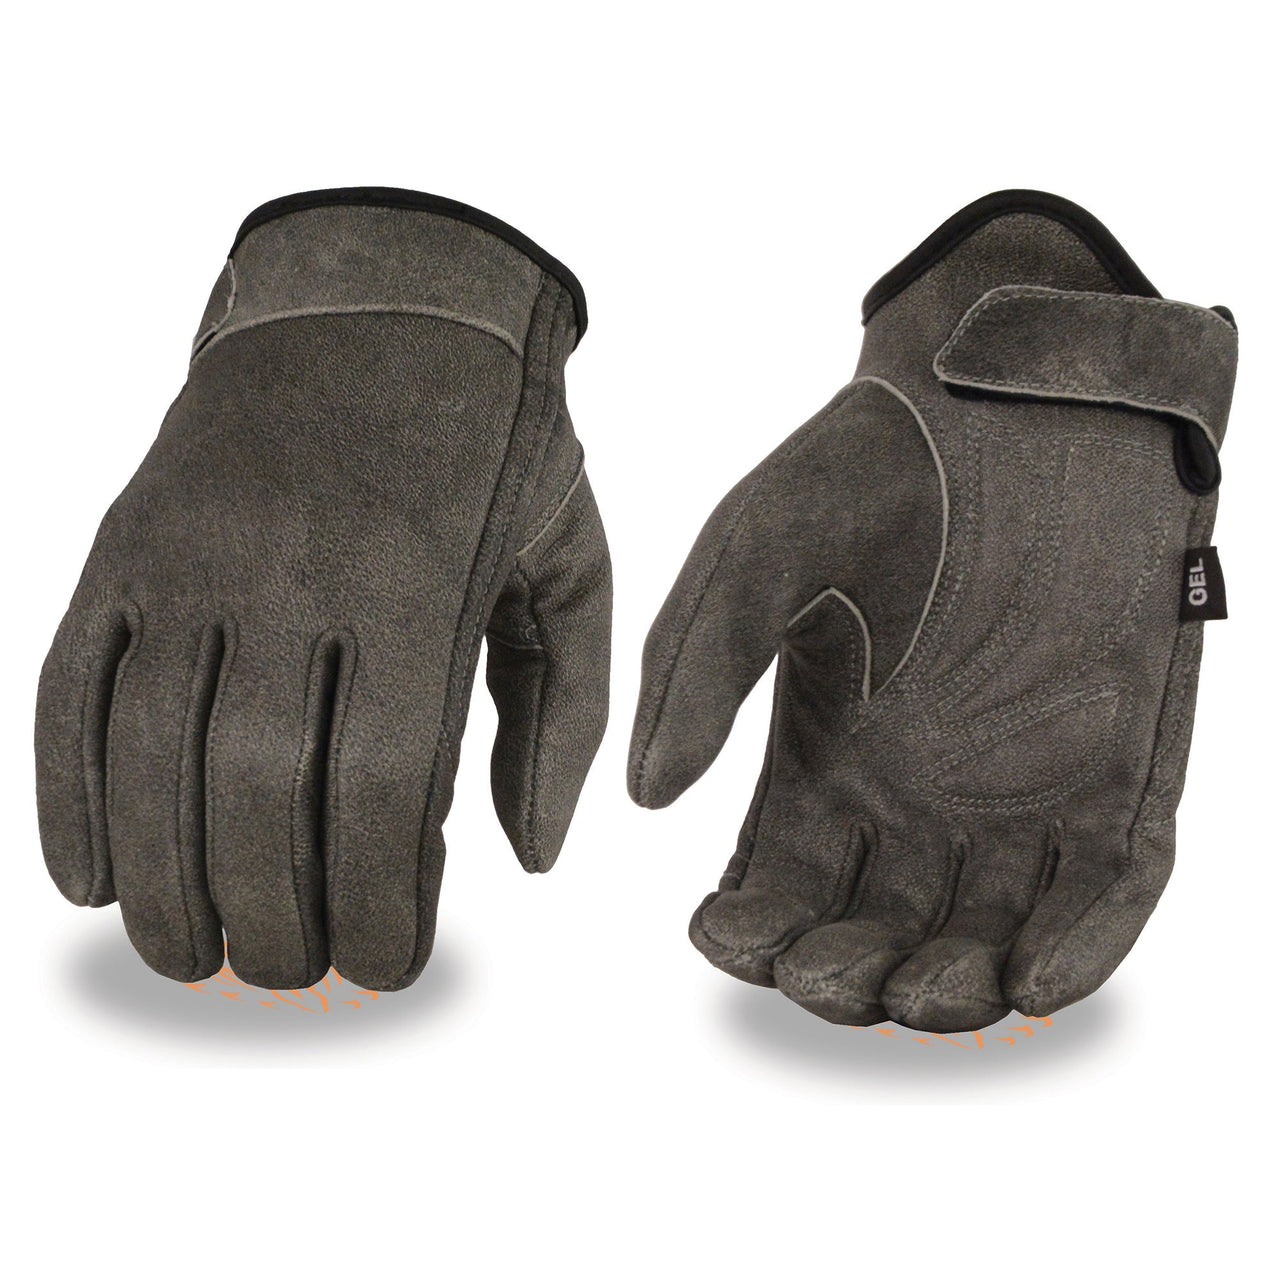 Men's Distressed Gray Leather Gloves with Gel Palm & Wrist Strap - HighwayLeather